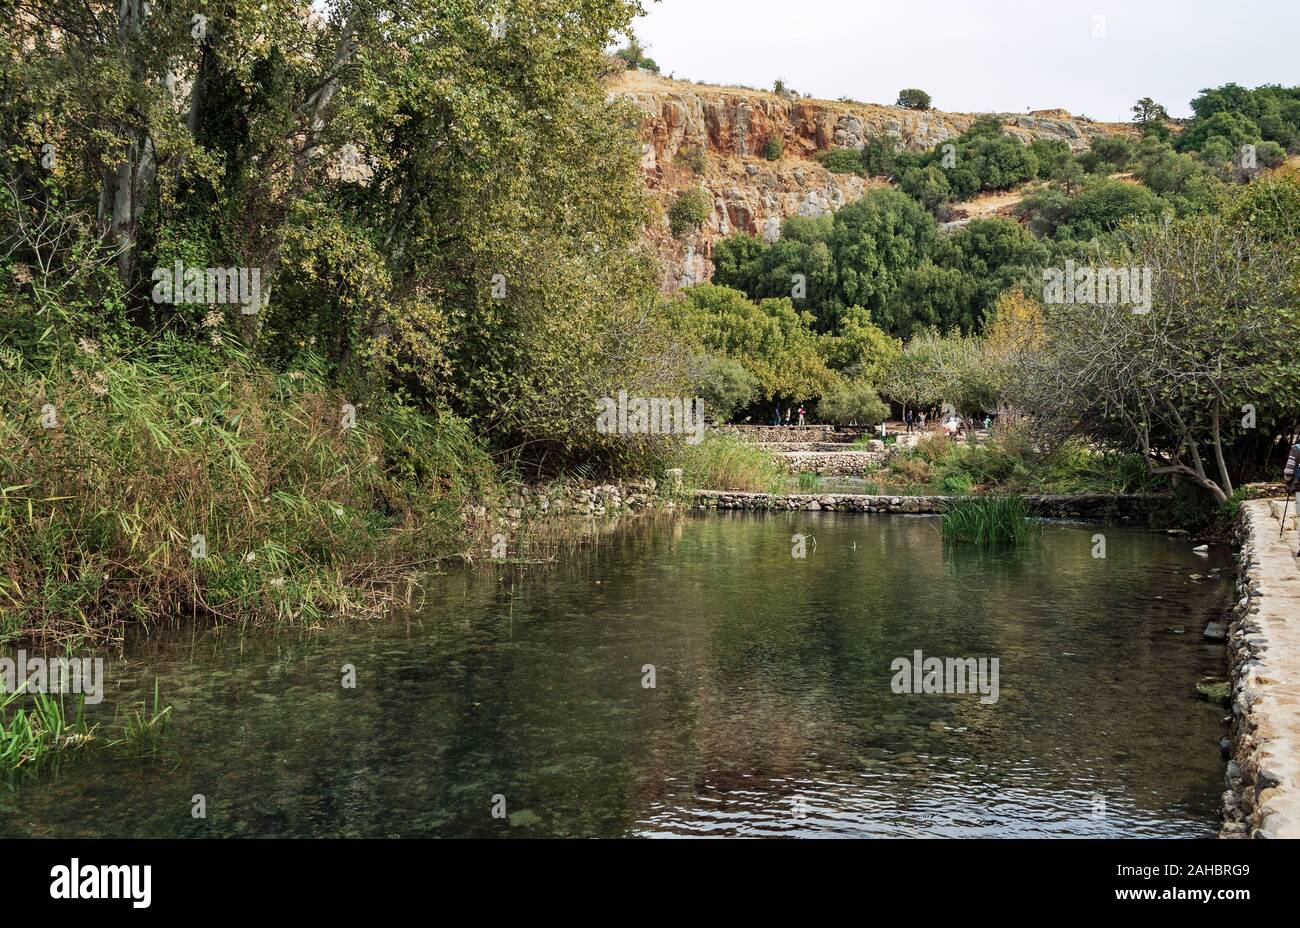 tourists at the banias springs in the israel national park on the hermon stream showing the vegetation and the pools constructed in ancient times Stock Photo